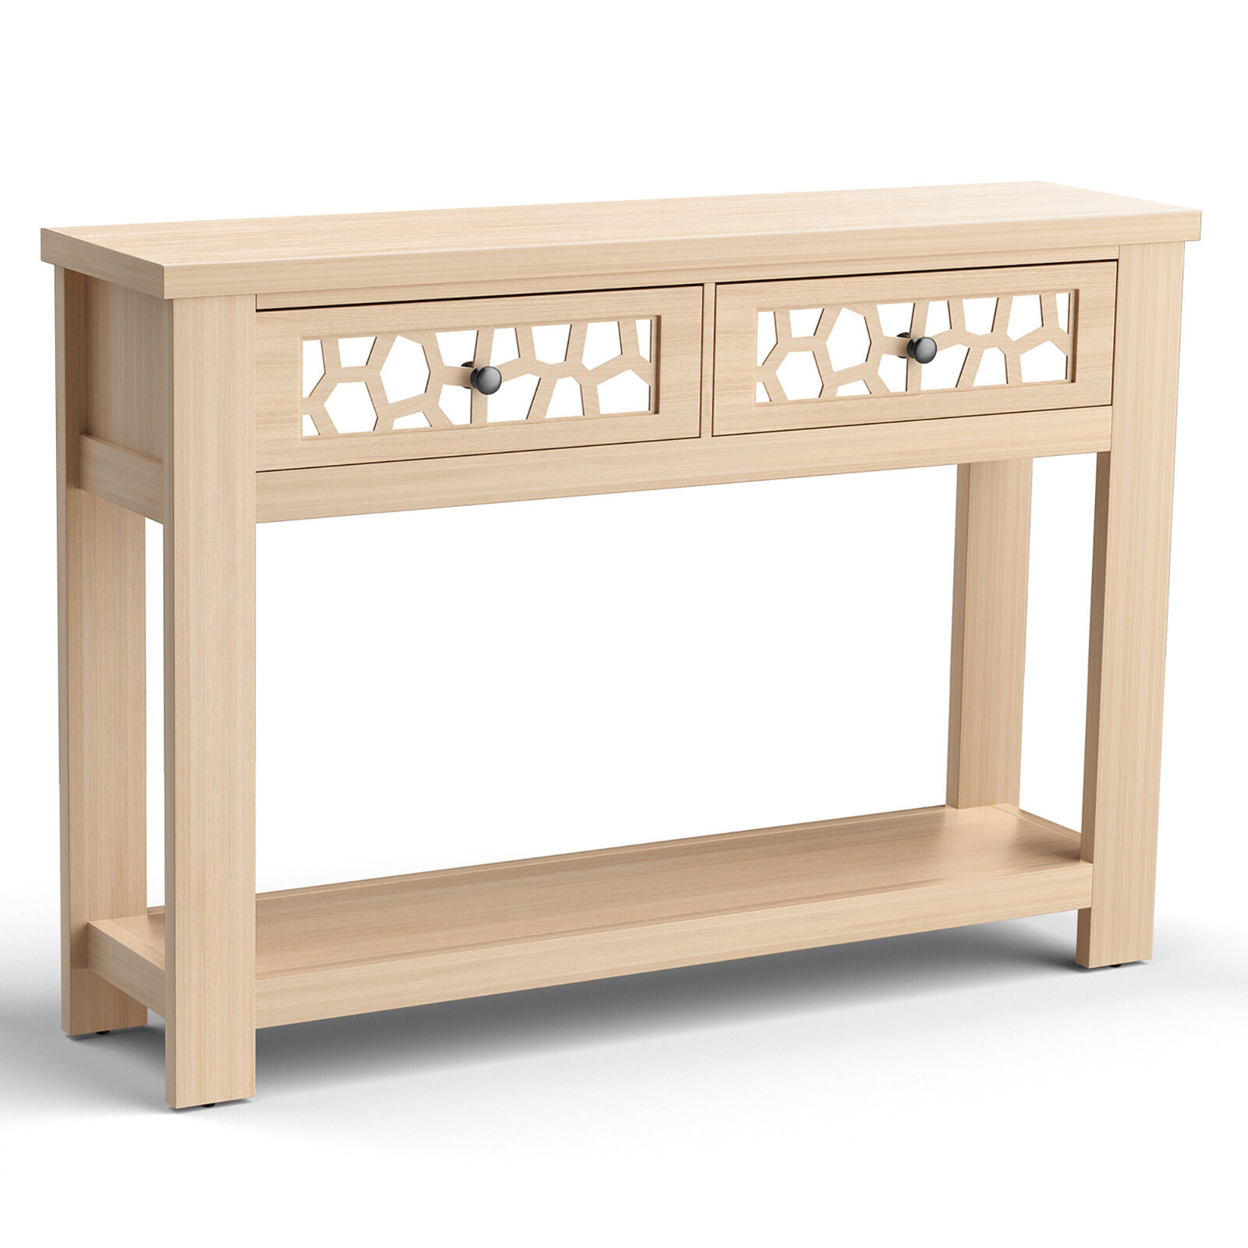 2-tier Console Entryway Table W/ Drawers For Living Room Entrance Rustic - Natural